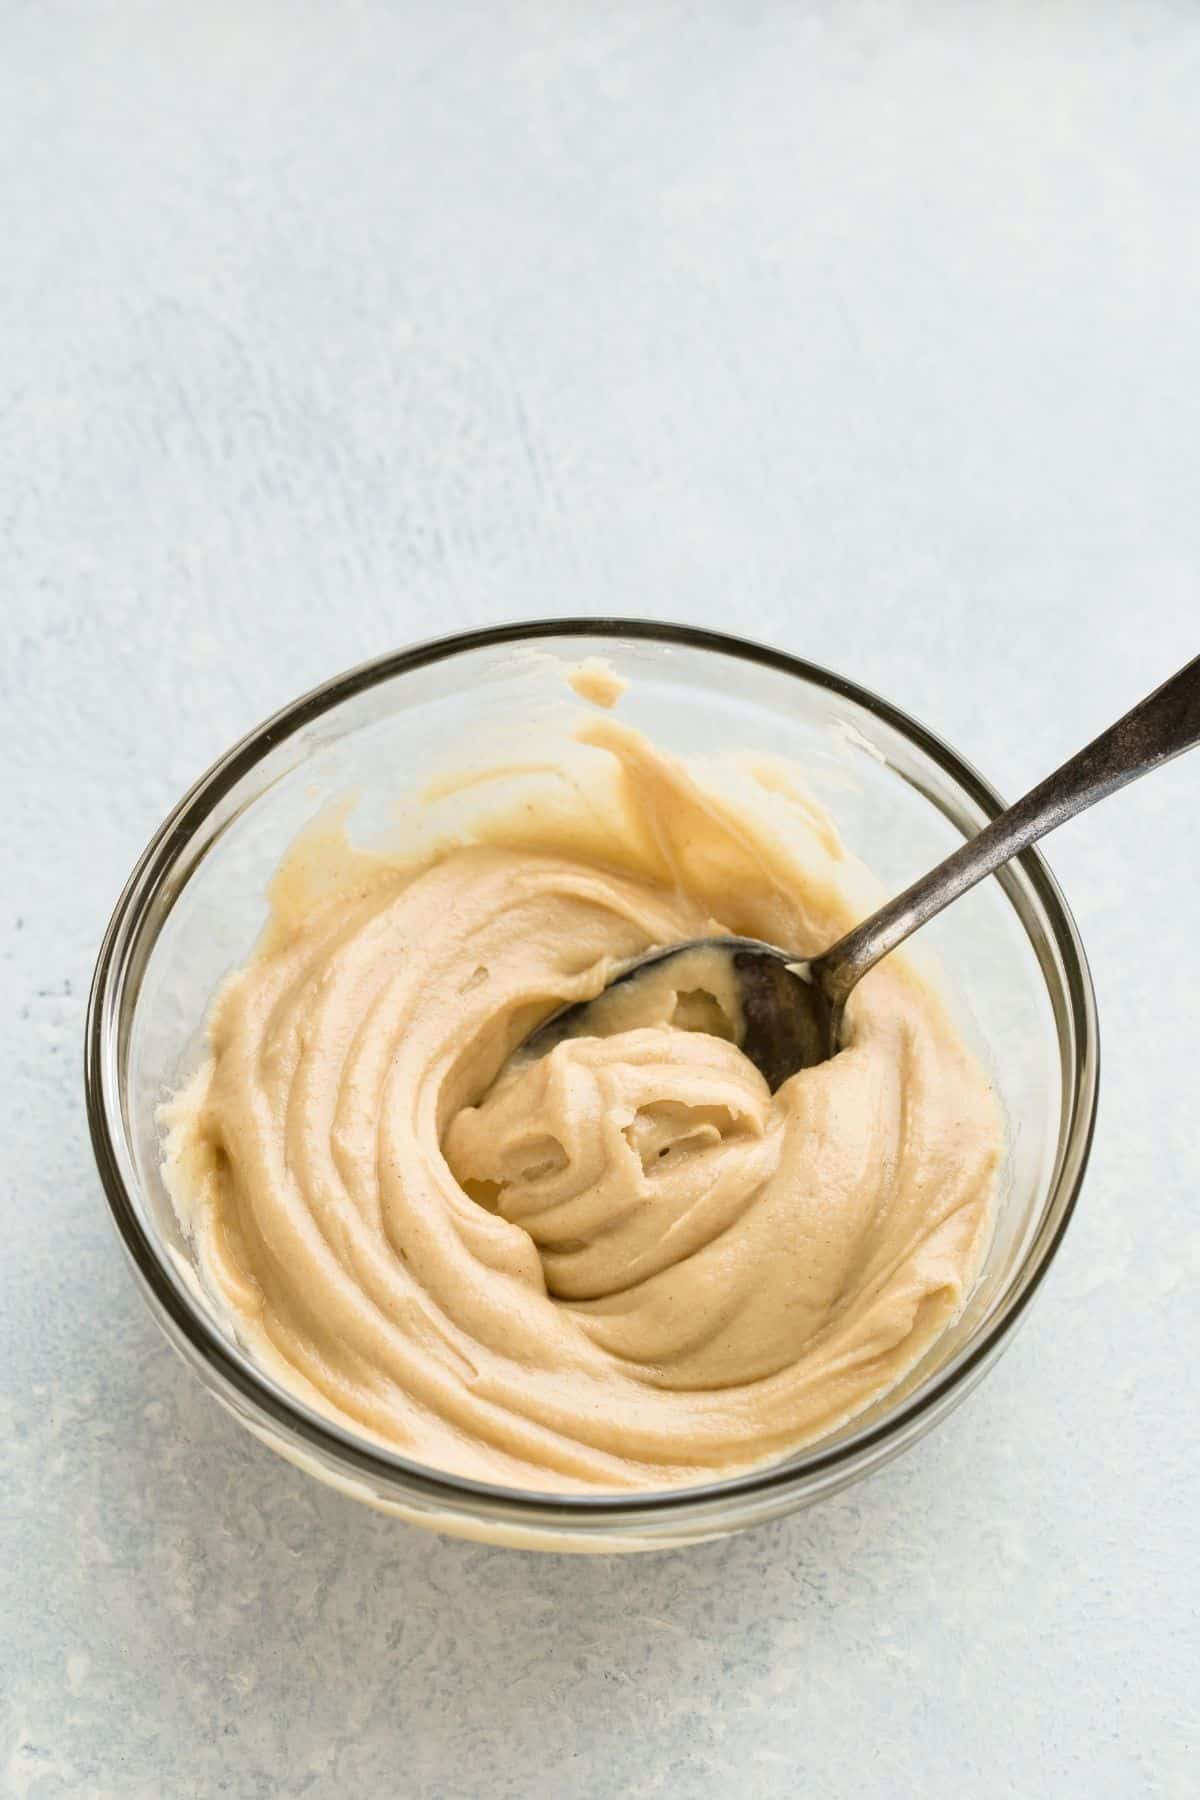 Peanut Butter Frosting in a glass bowl.